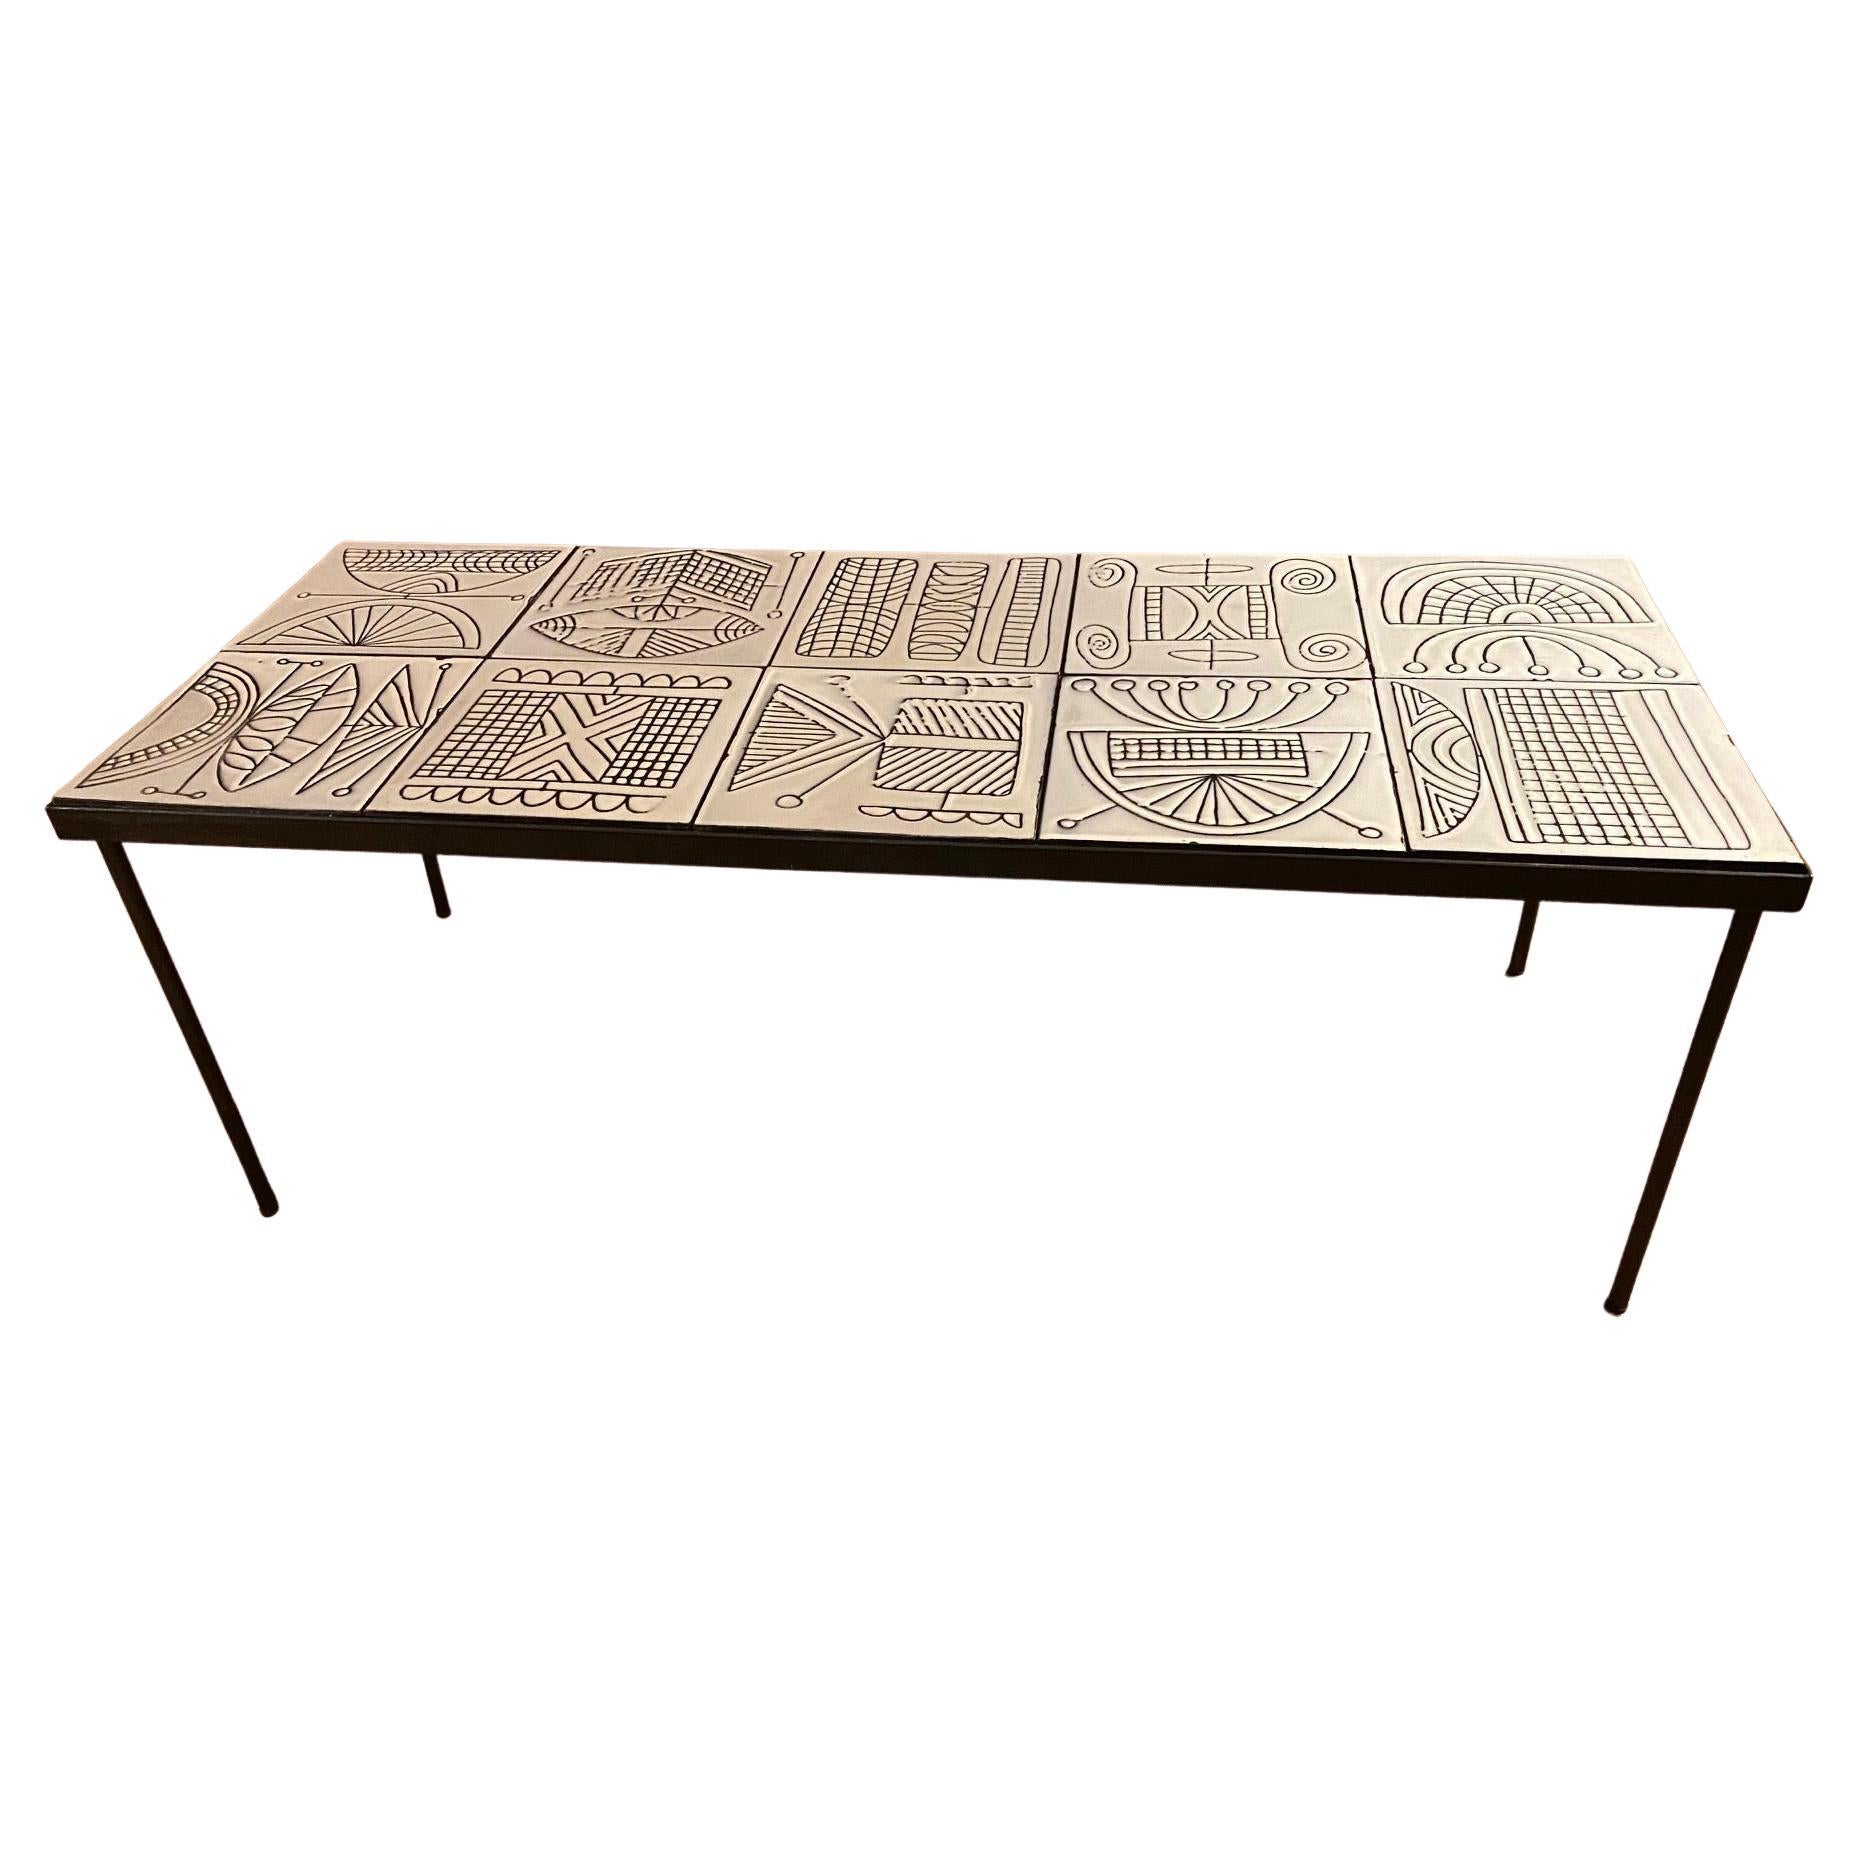 Ceramic Coffee table by Roger Capron, France, 1960s